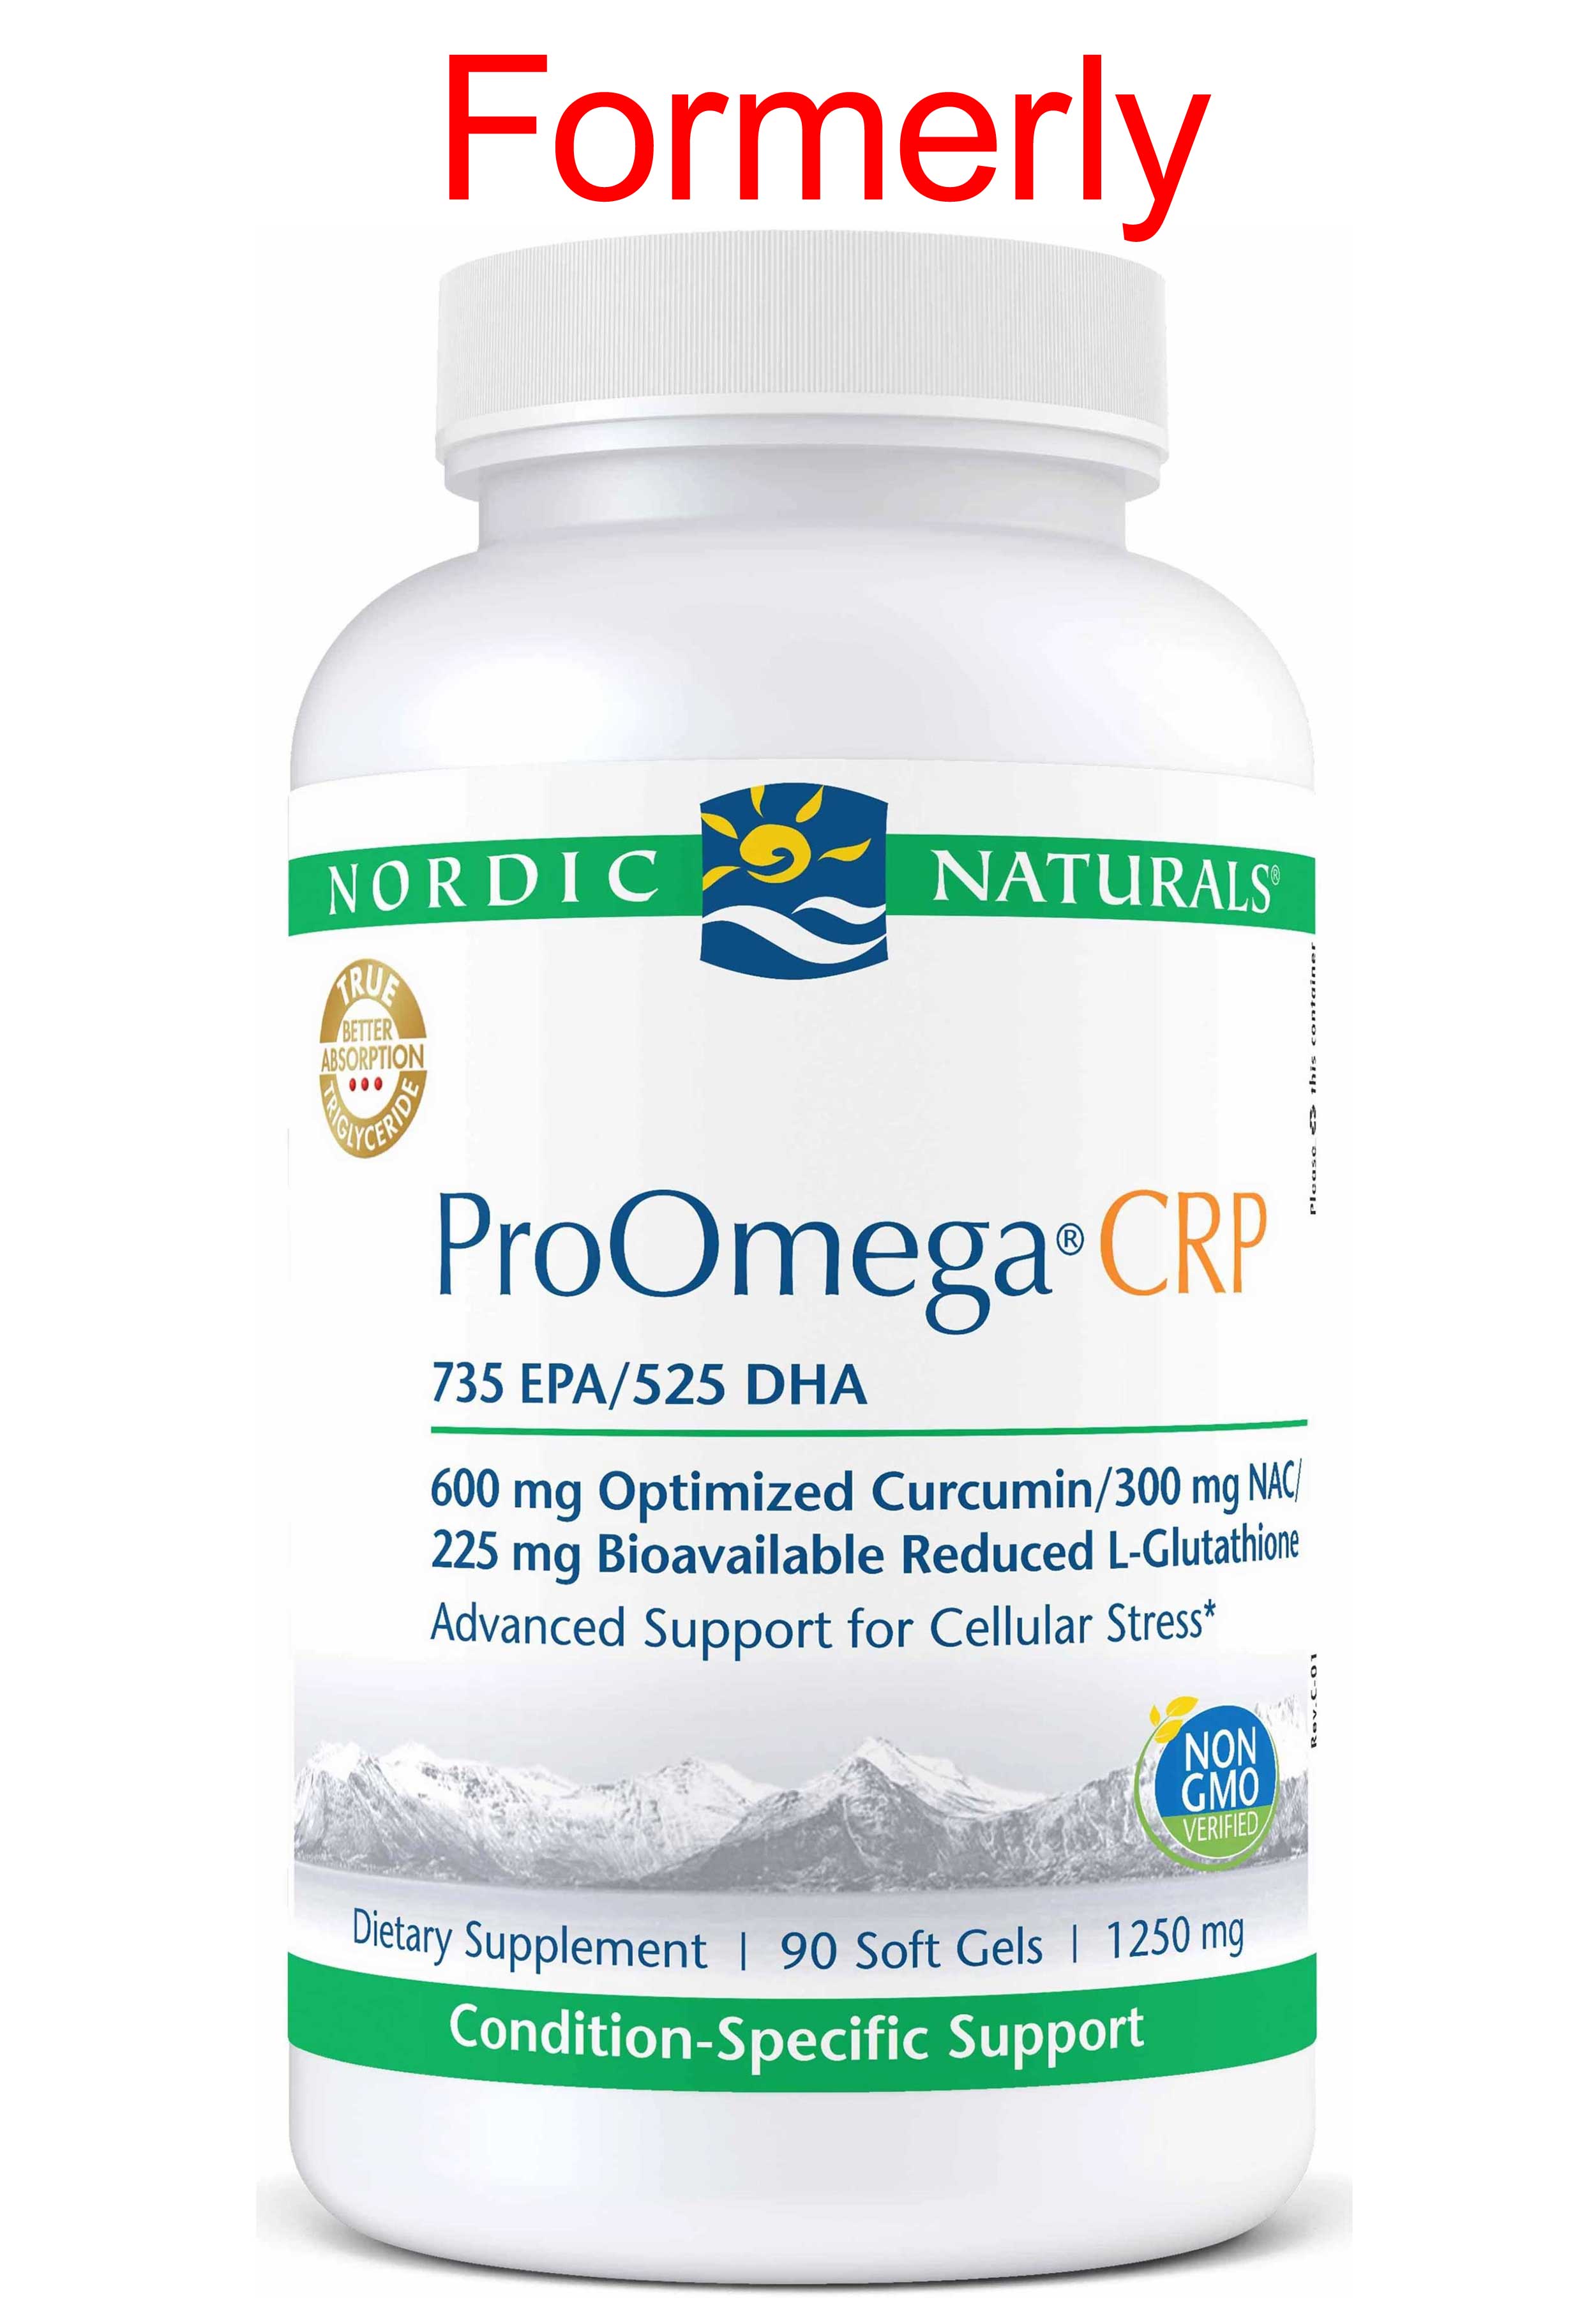 Nordic Naturals ProOmega Curcumin (Formerly ProOmega CRP) Formerly